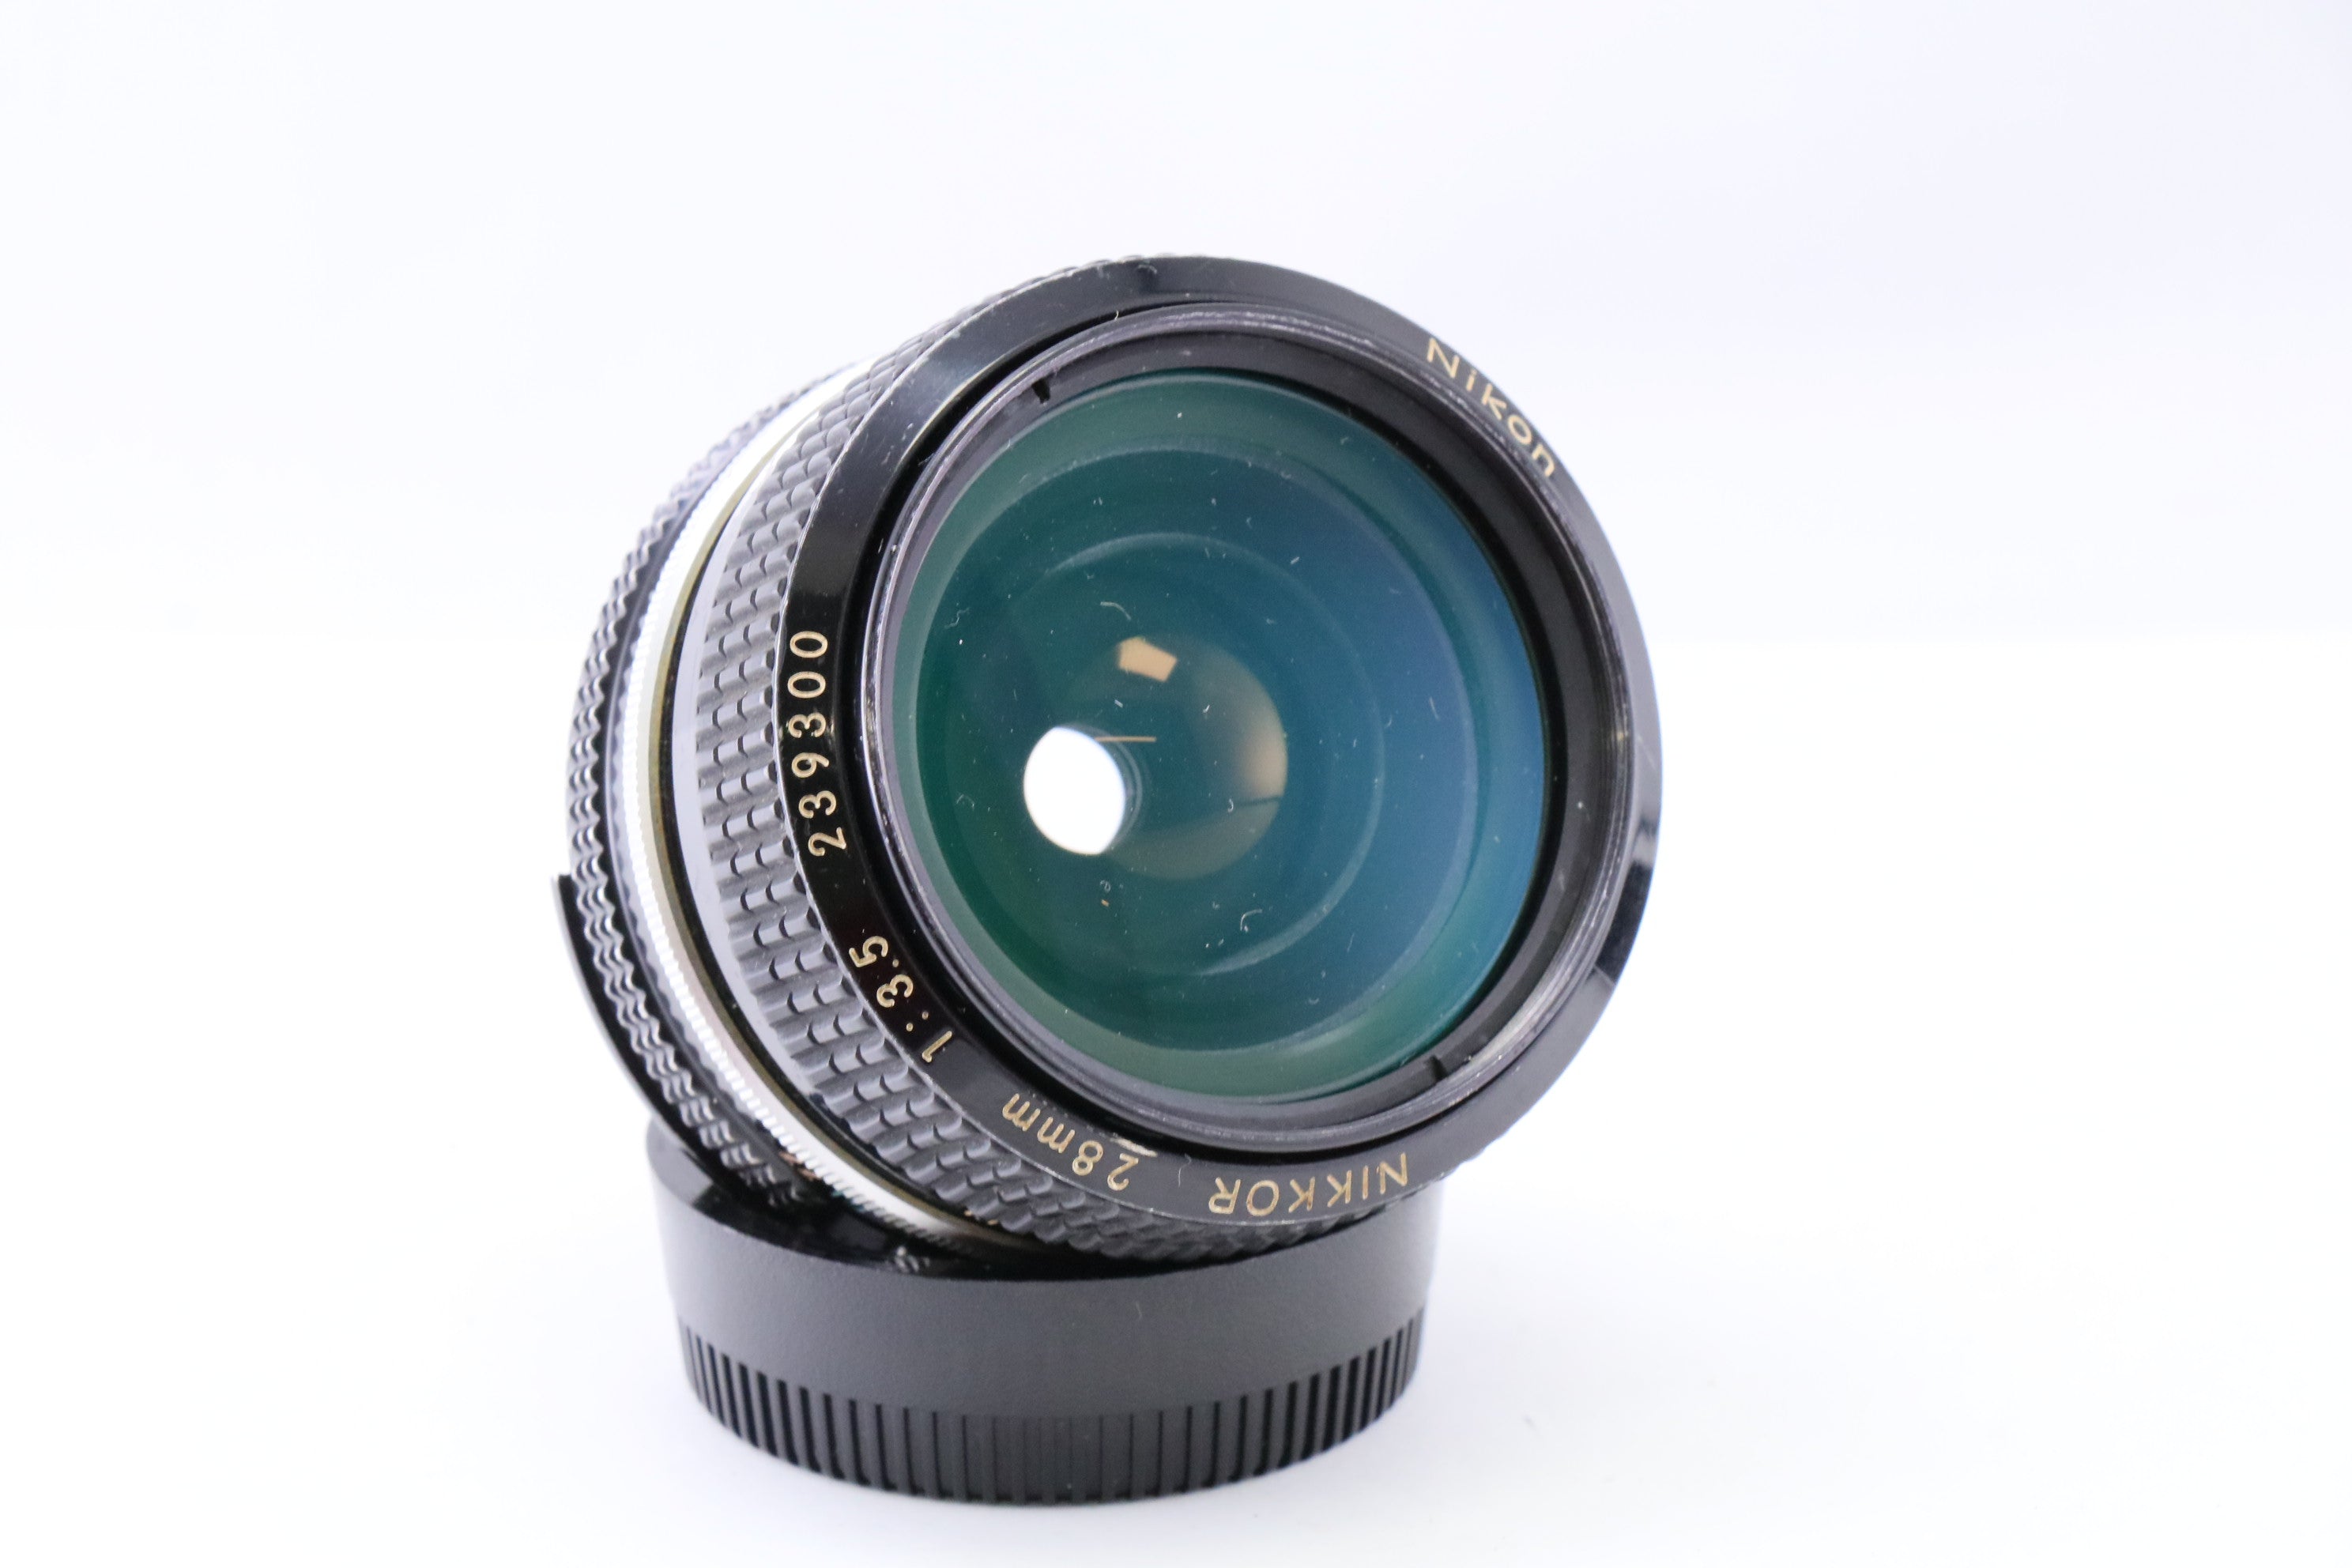 Nikon ニコン New Nikkor 28mm f3.5 非Ai